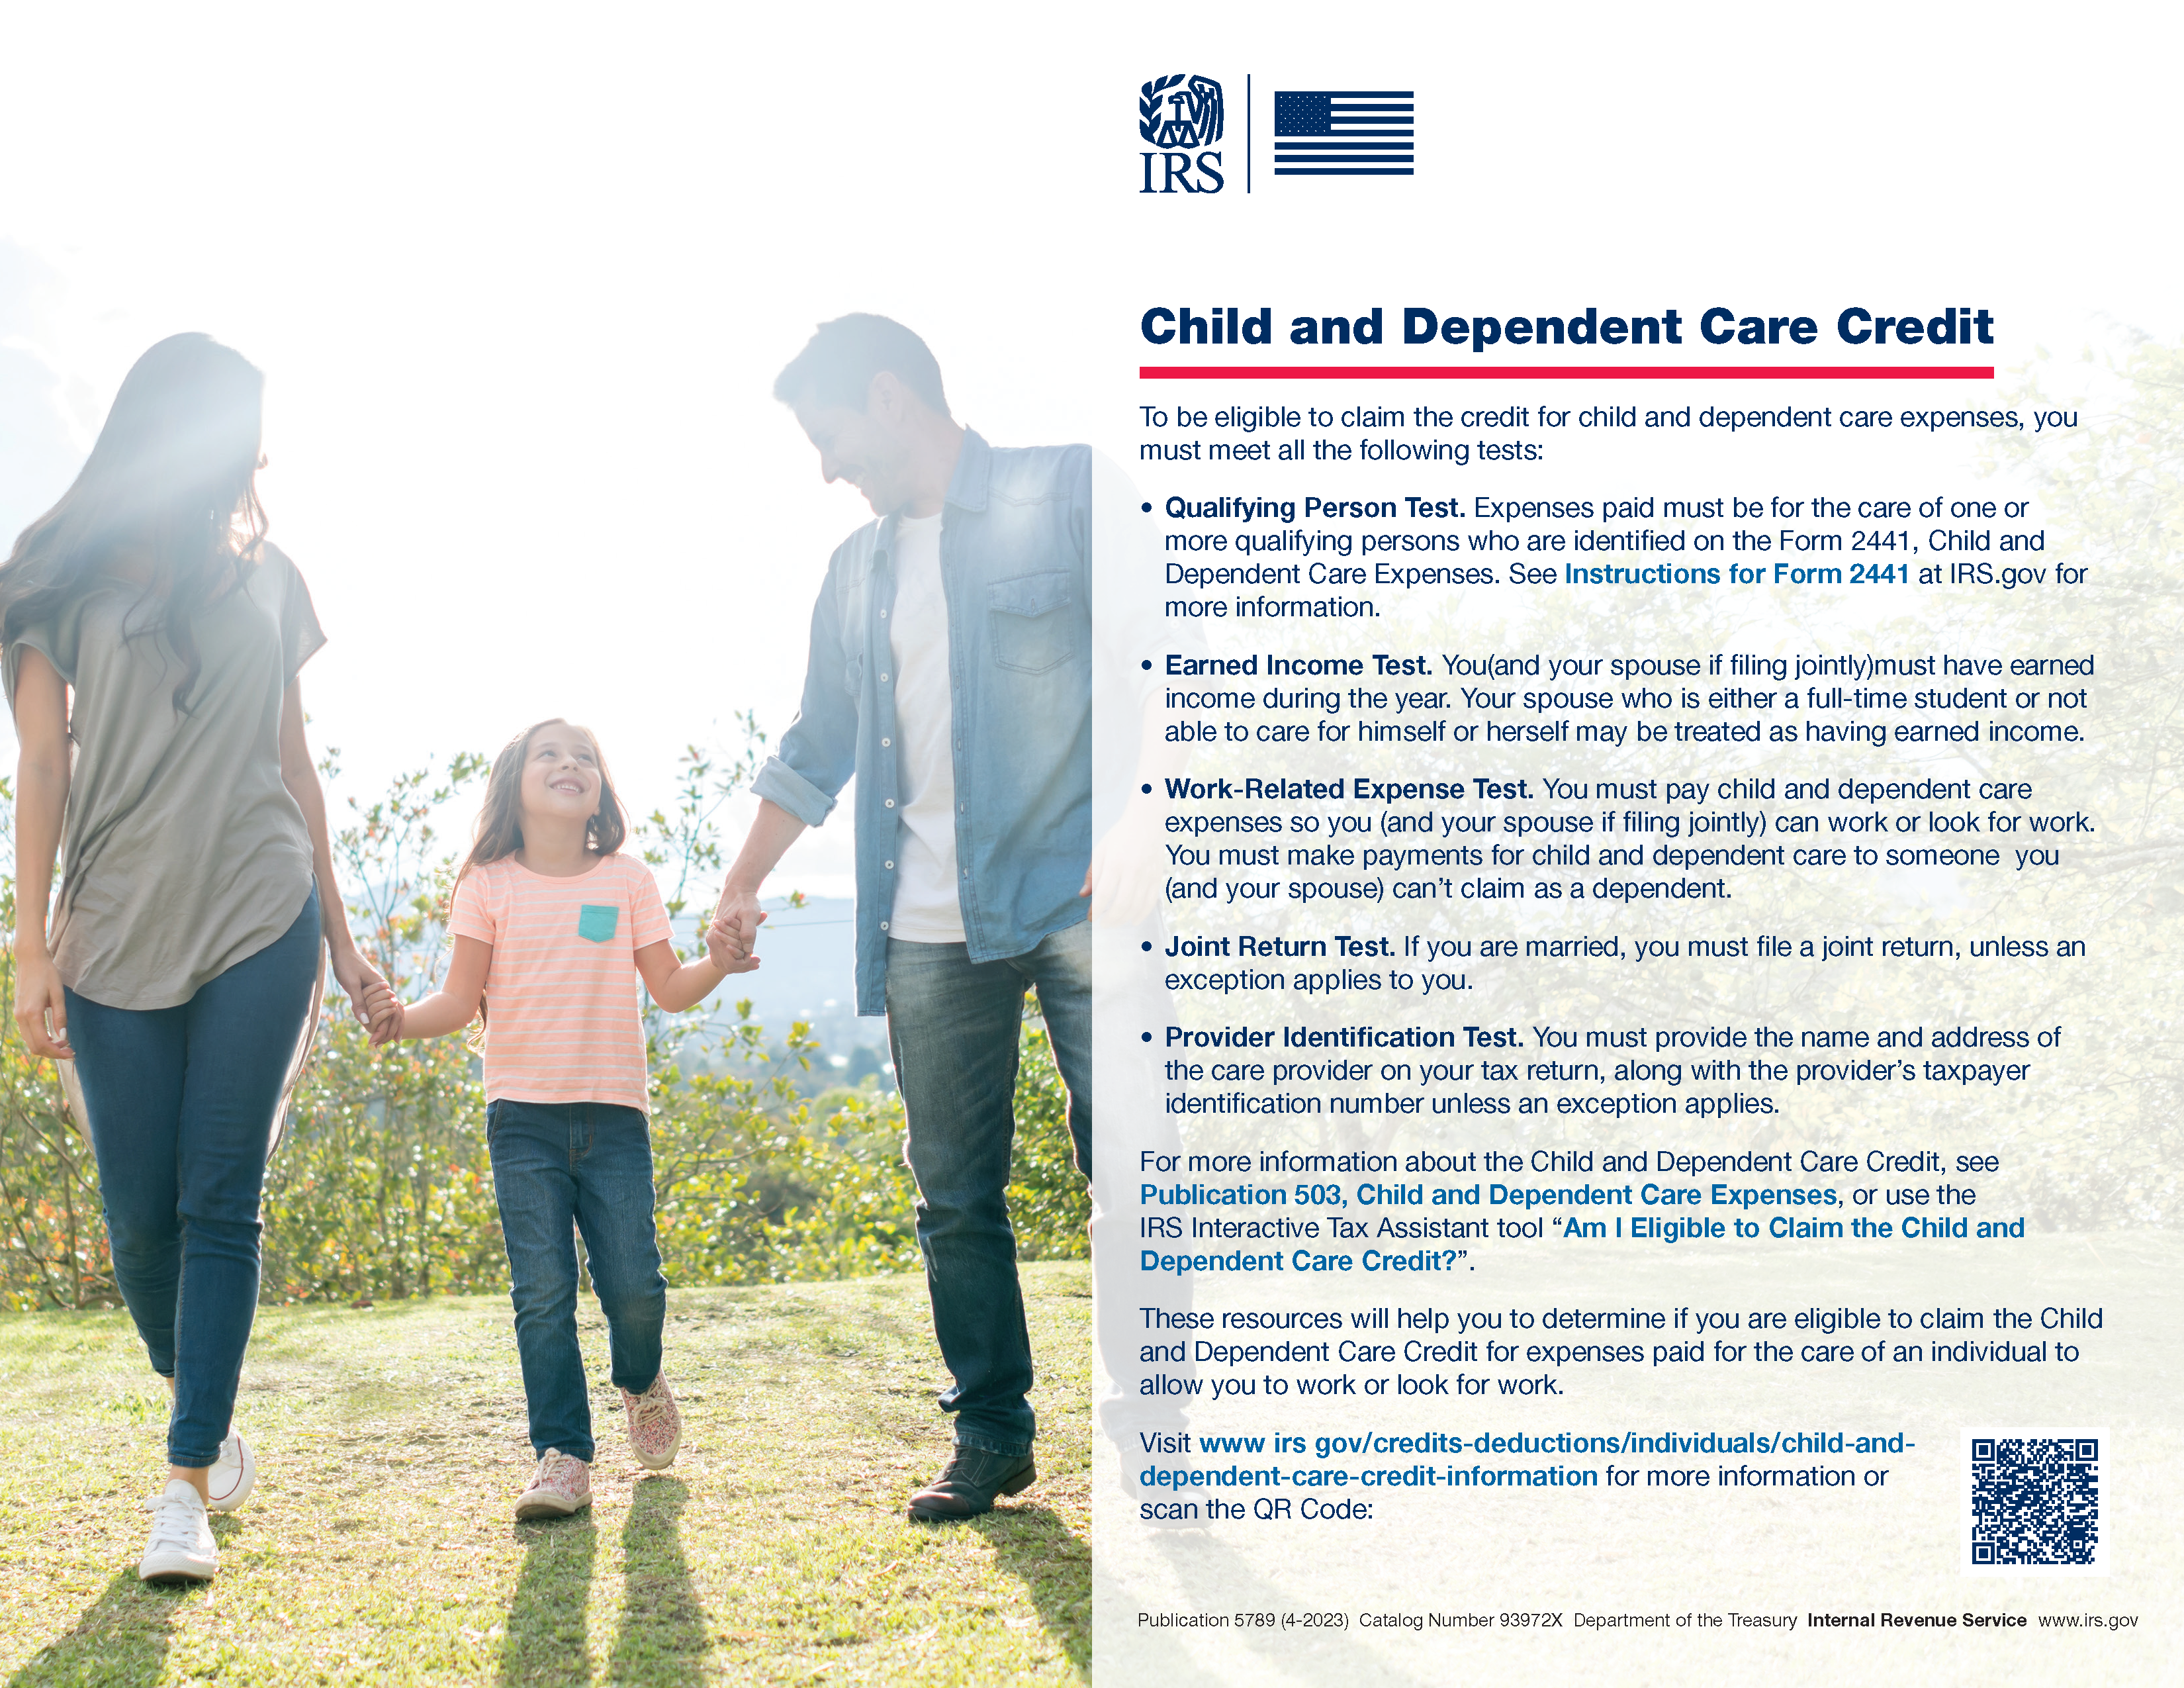 Publication 5789 - Child and Dependent Care Credit